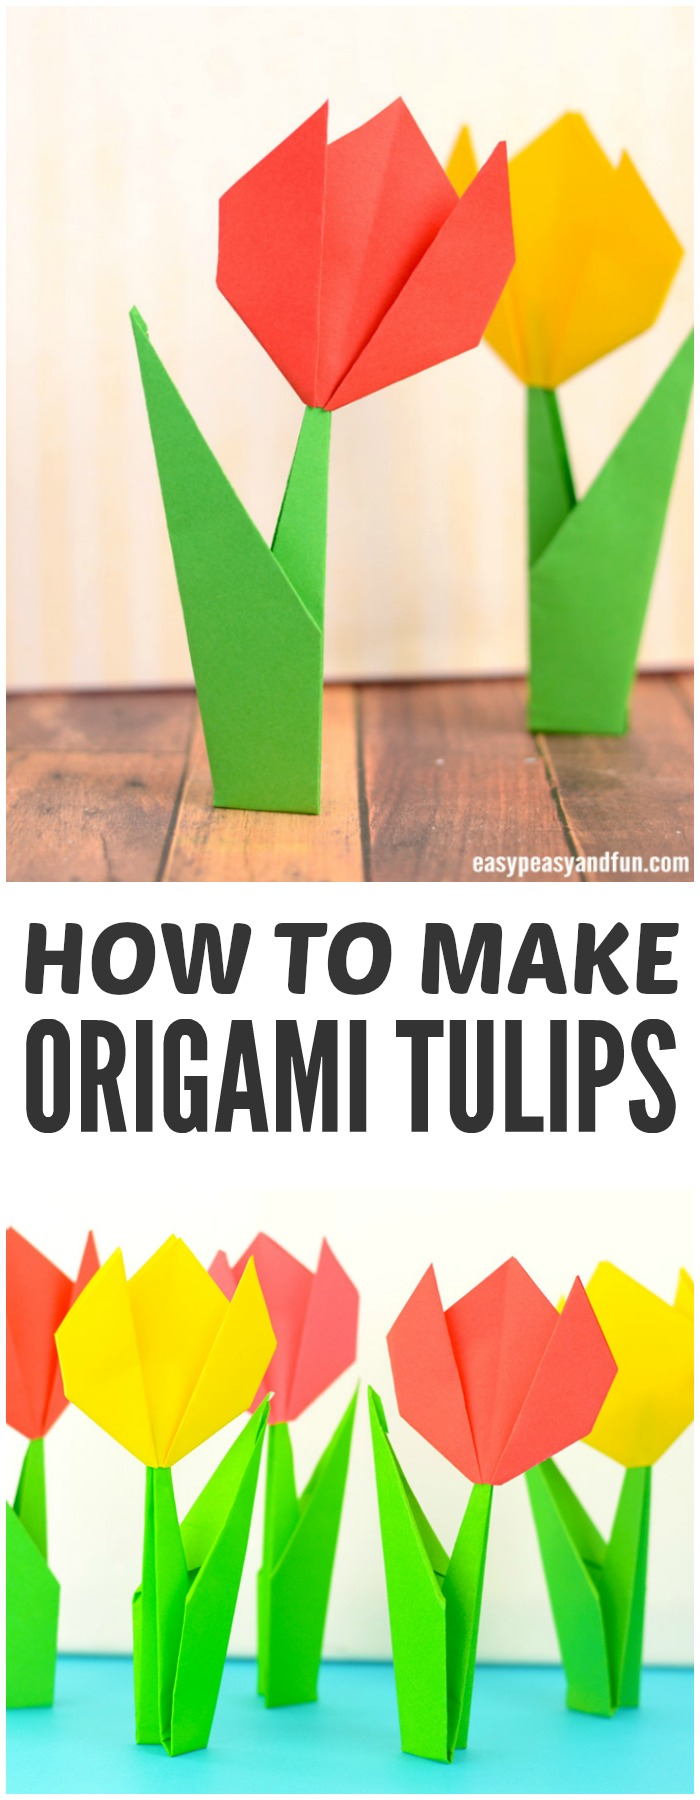 Simple Origami Instructions How To Make Origami Flowers Origami Tulip Tutorial With Diagram